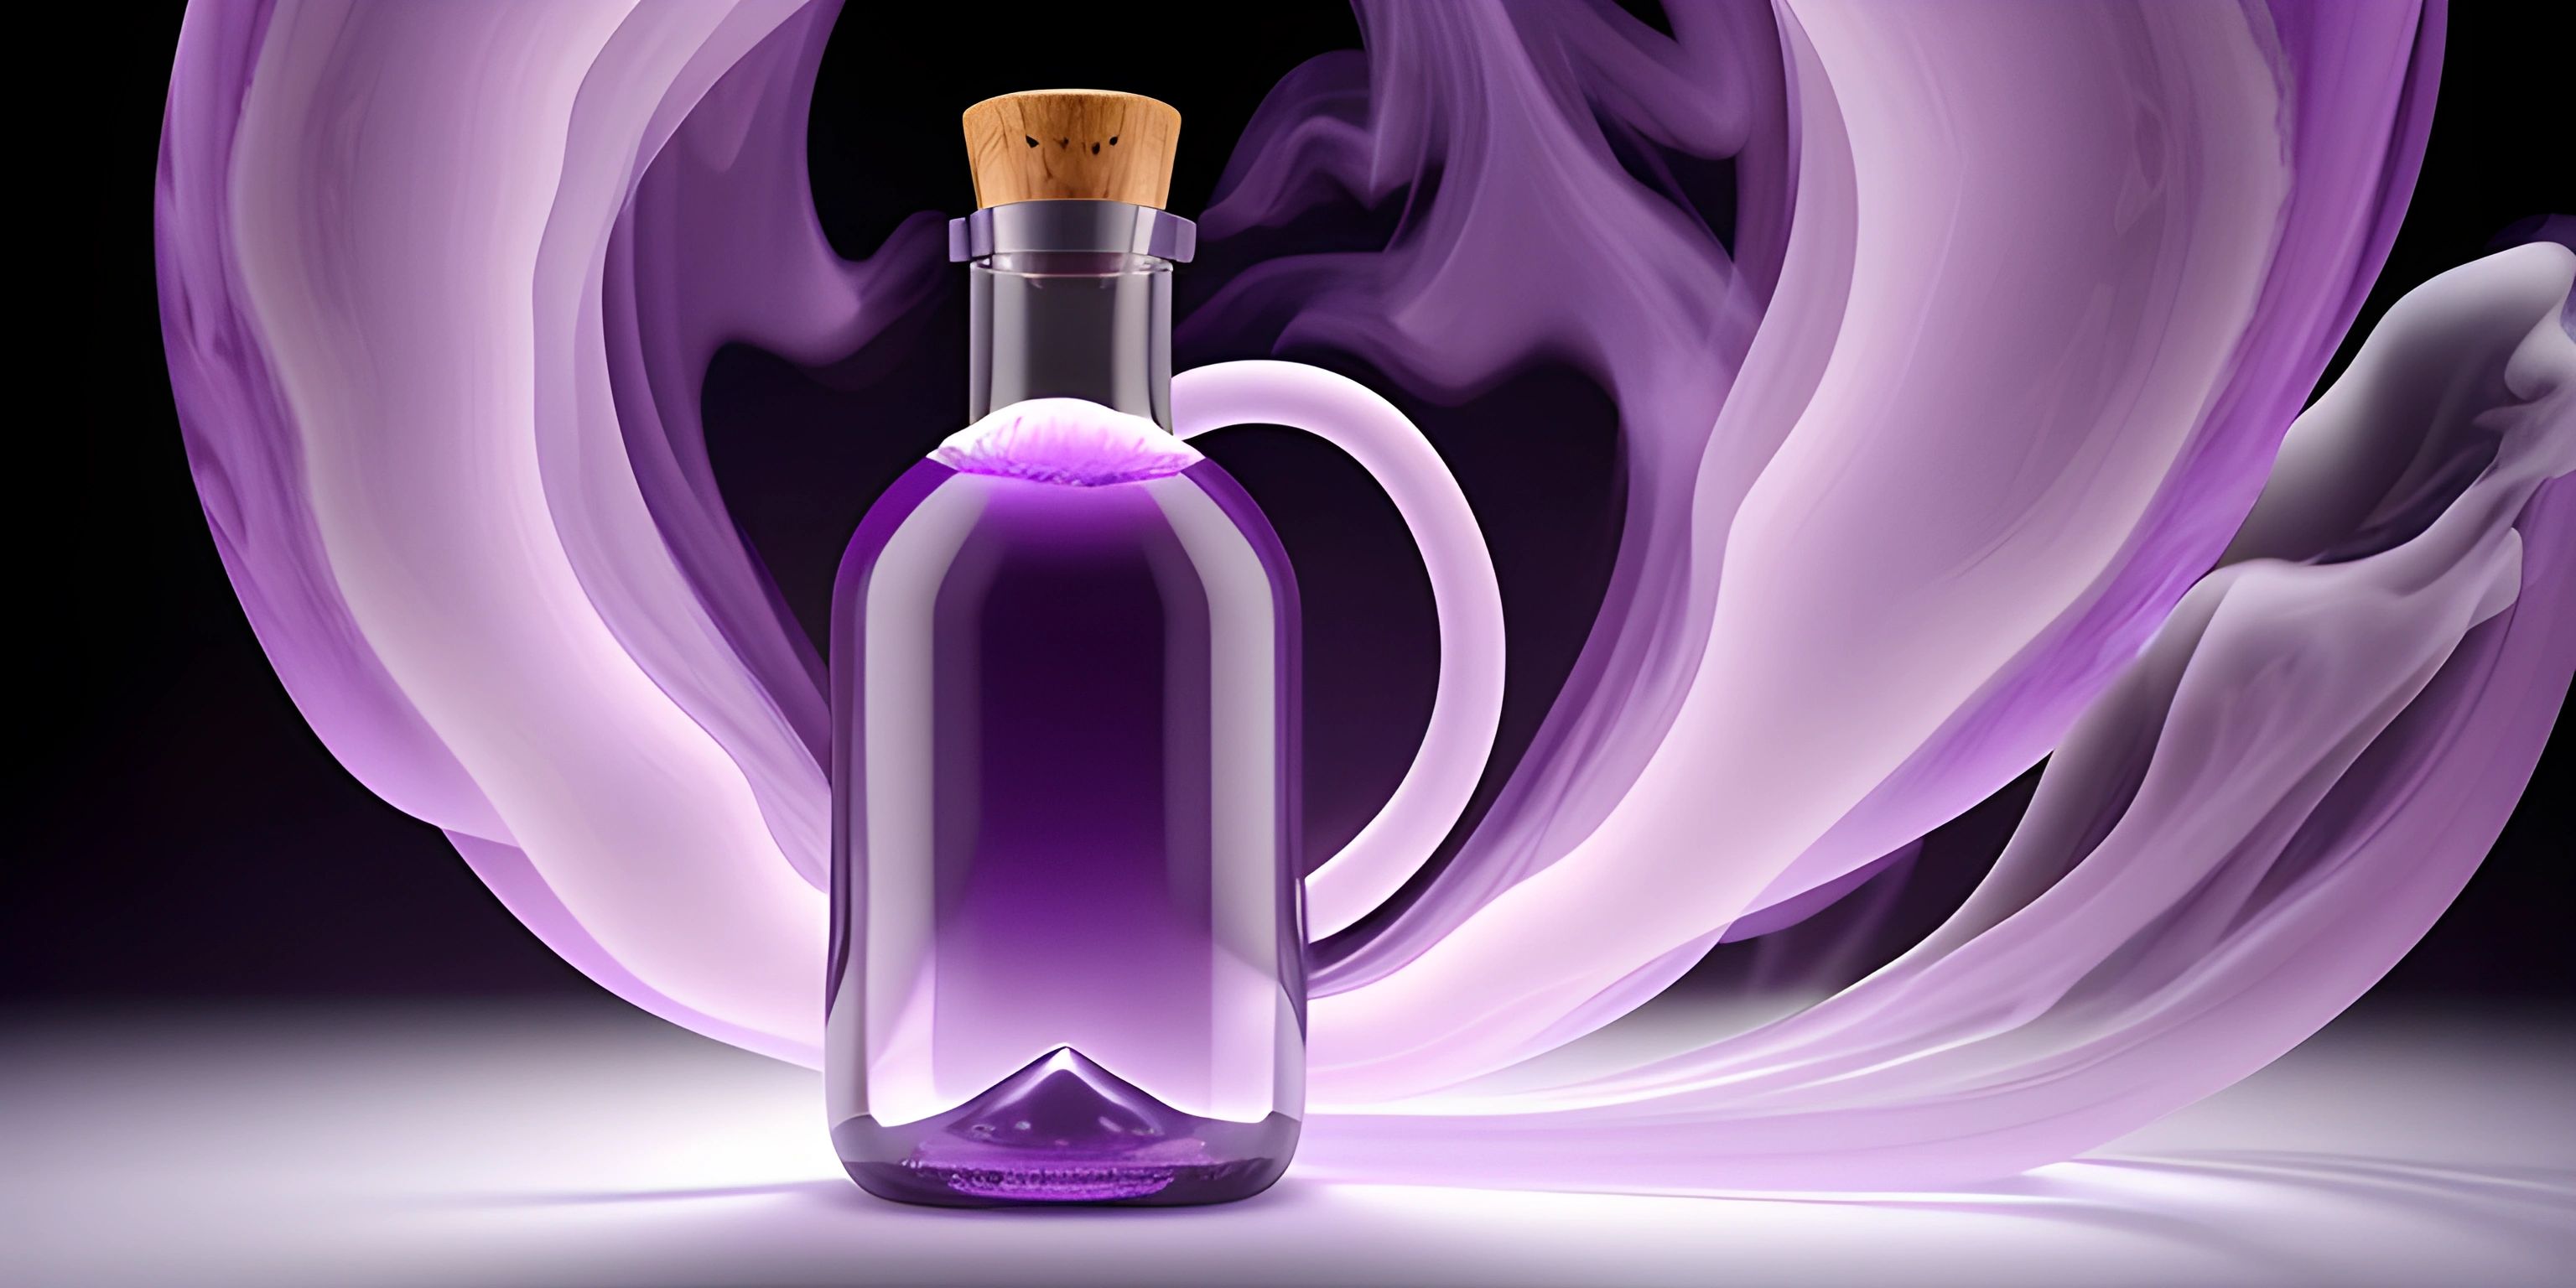 an illustration of a purple liquid bottle with a cork top in the middle of it